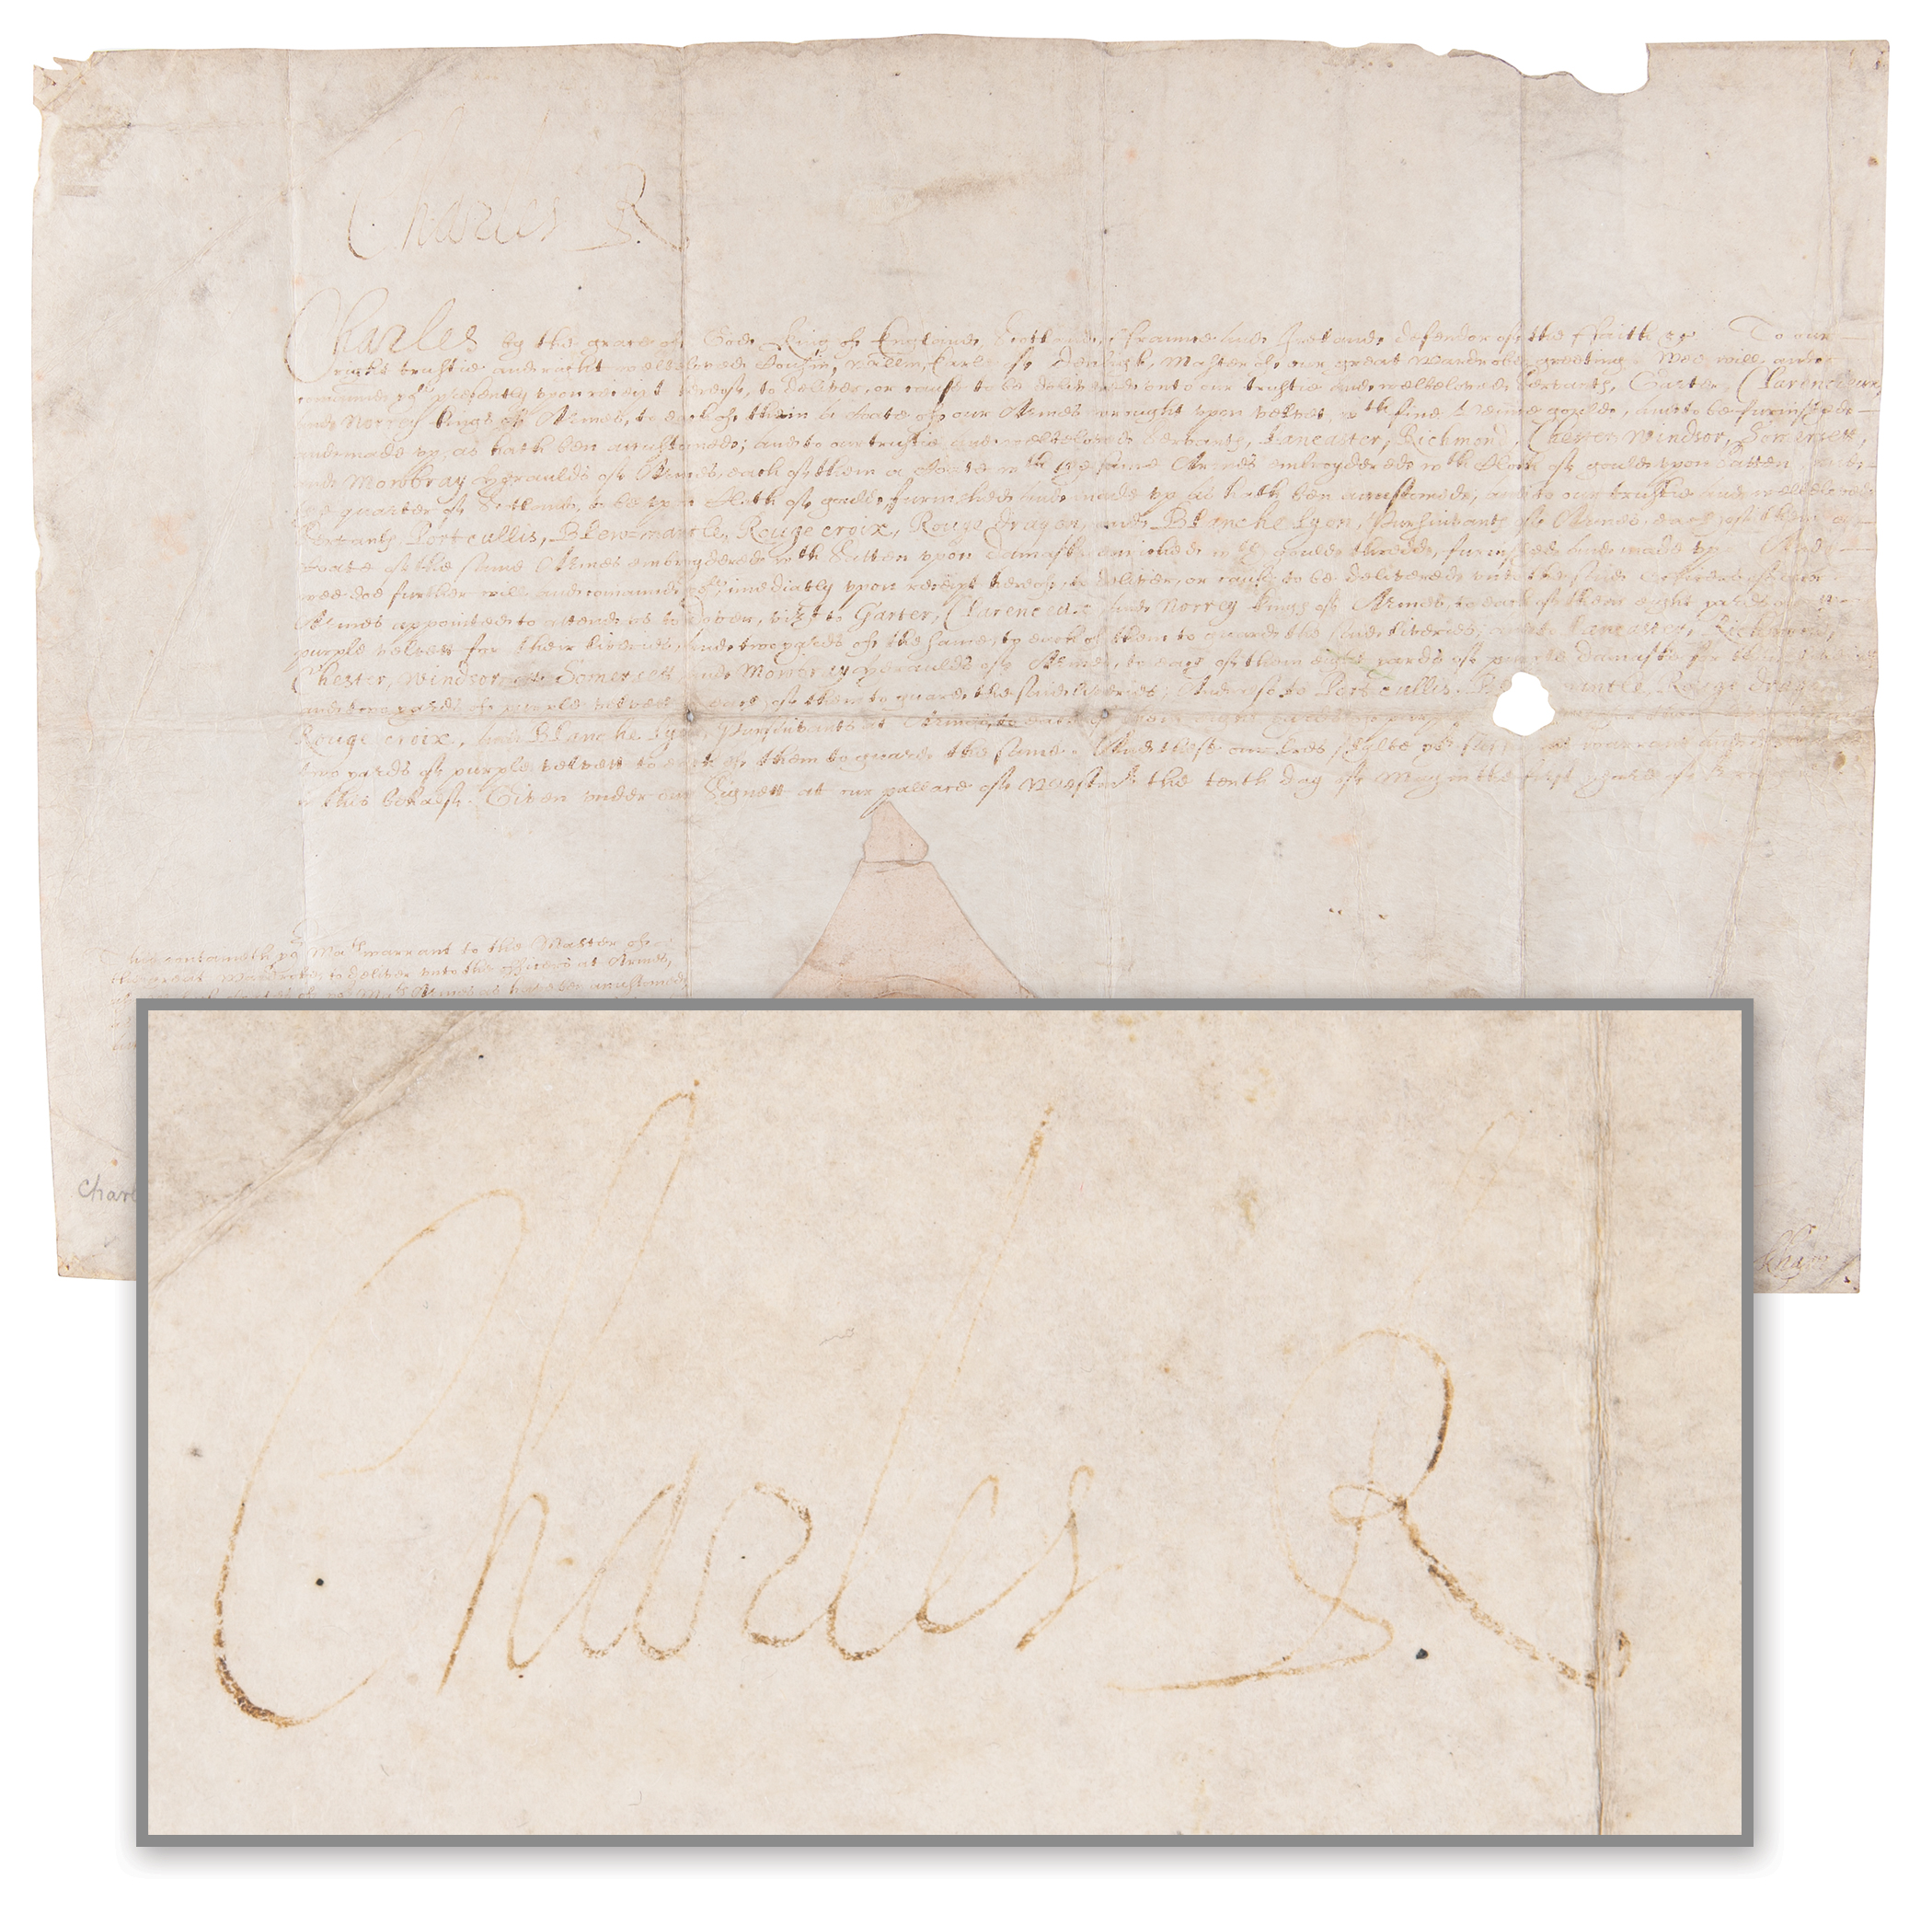 Lot #67 King Charles I Signed 1625 Document - approving officer livery for the arrival of the future queen - Image 1